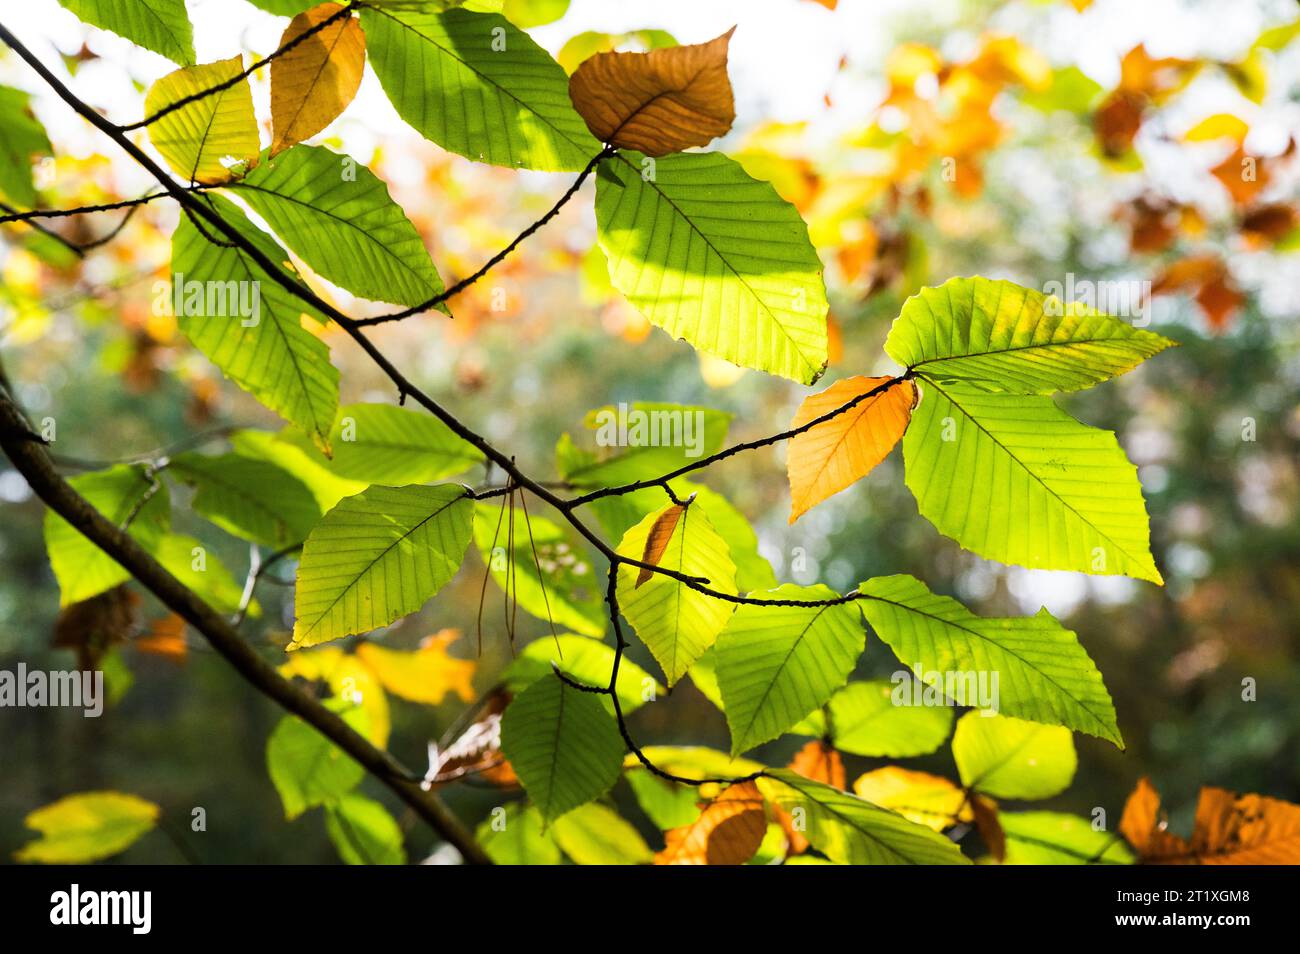 Light filters through the leaves of an American beech tree in autumn. Stock Photo